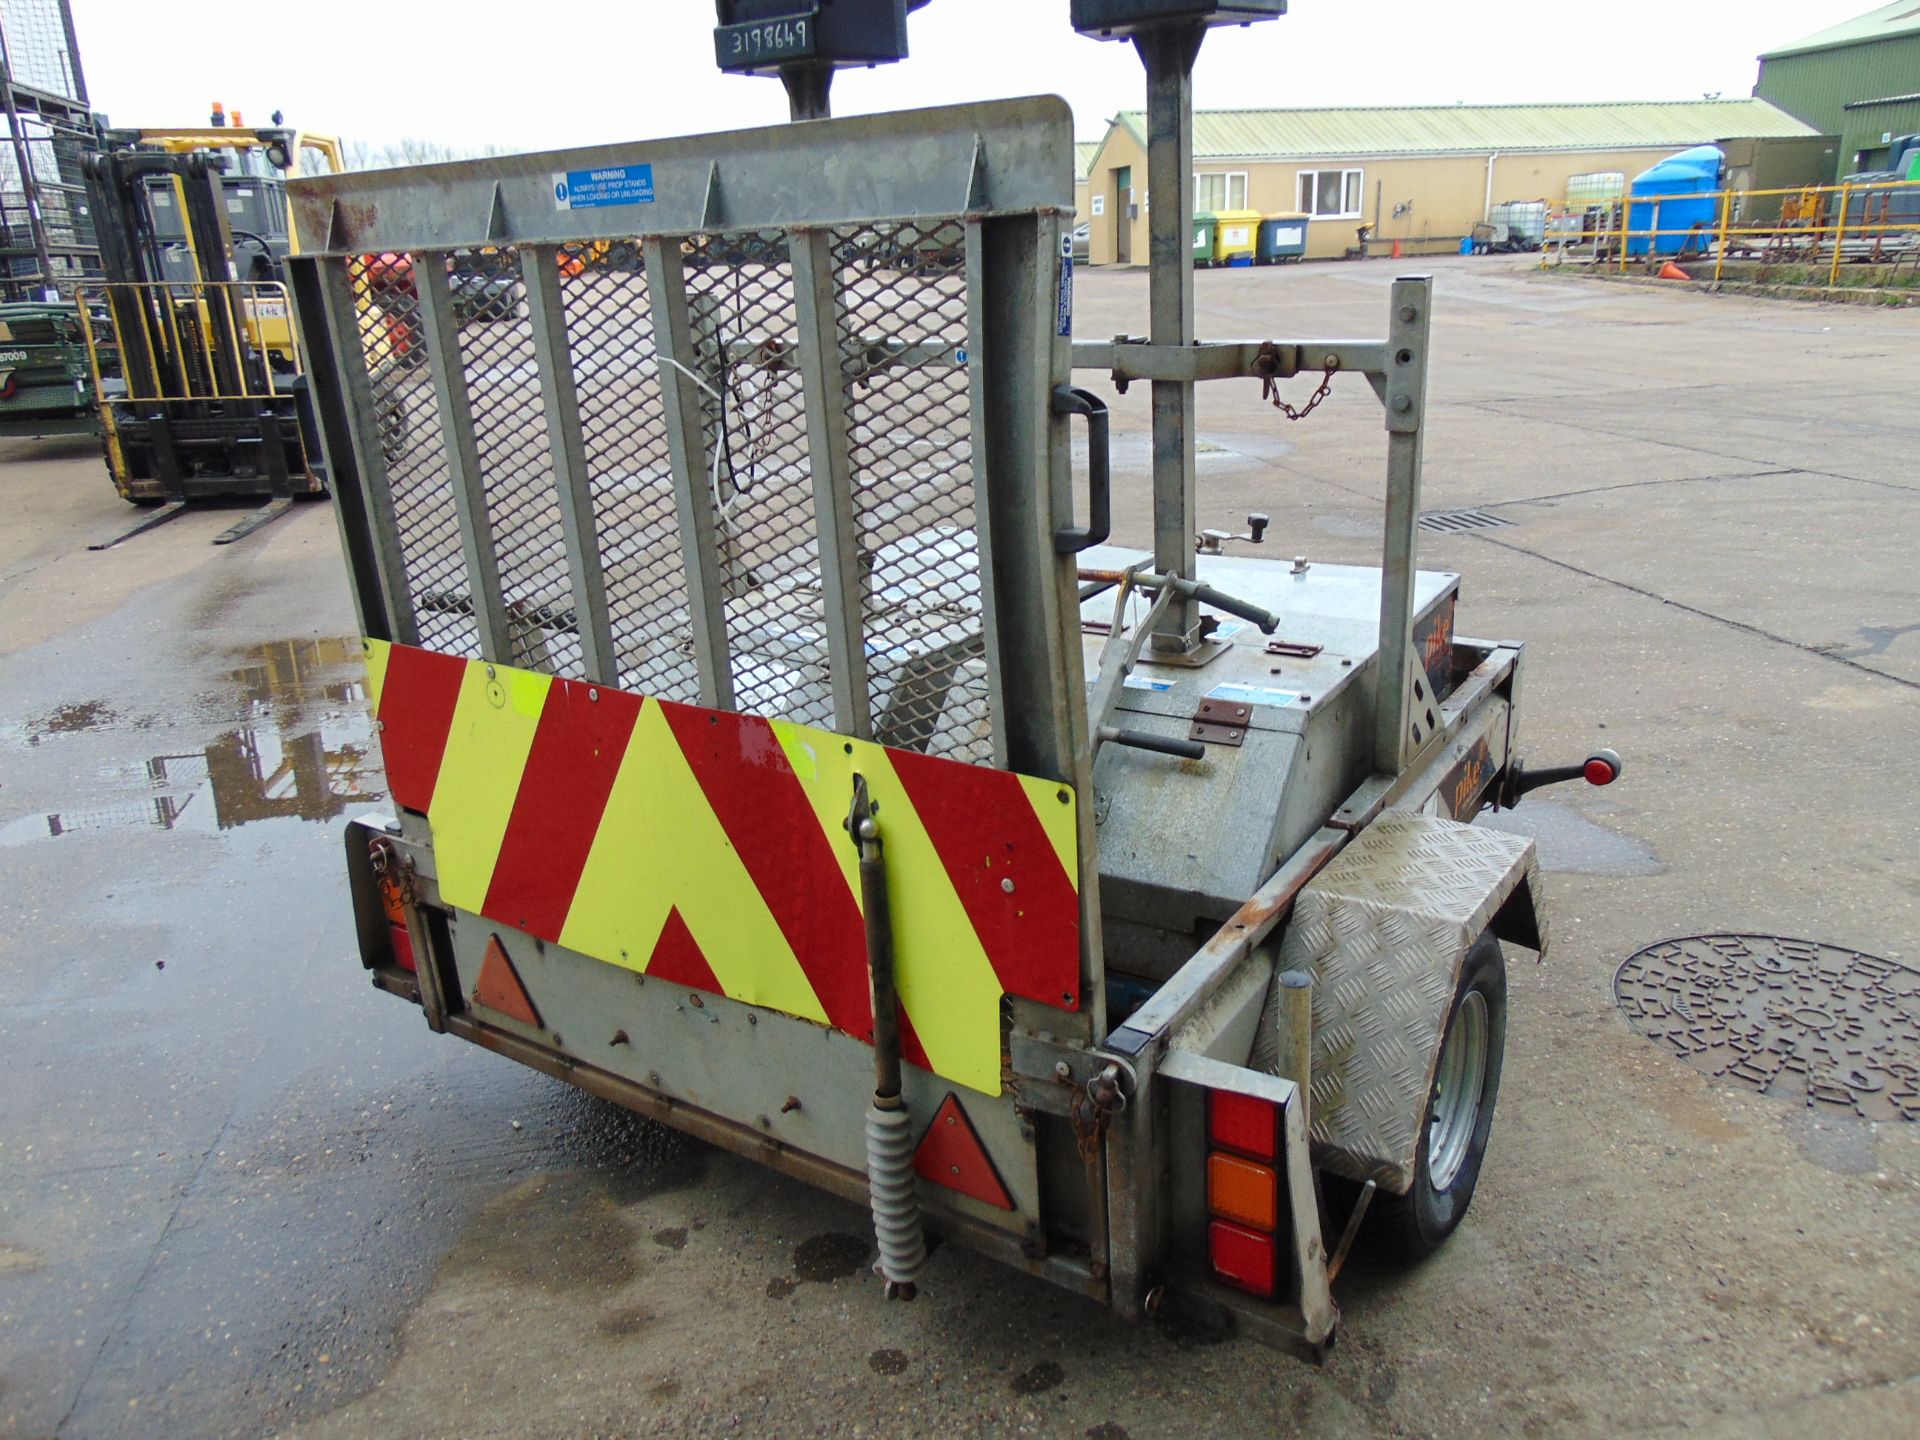 2 Way Traffic Light System c/w Conway Single Axle Trailer - Image 8 of 13